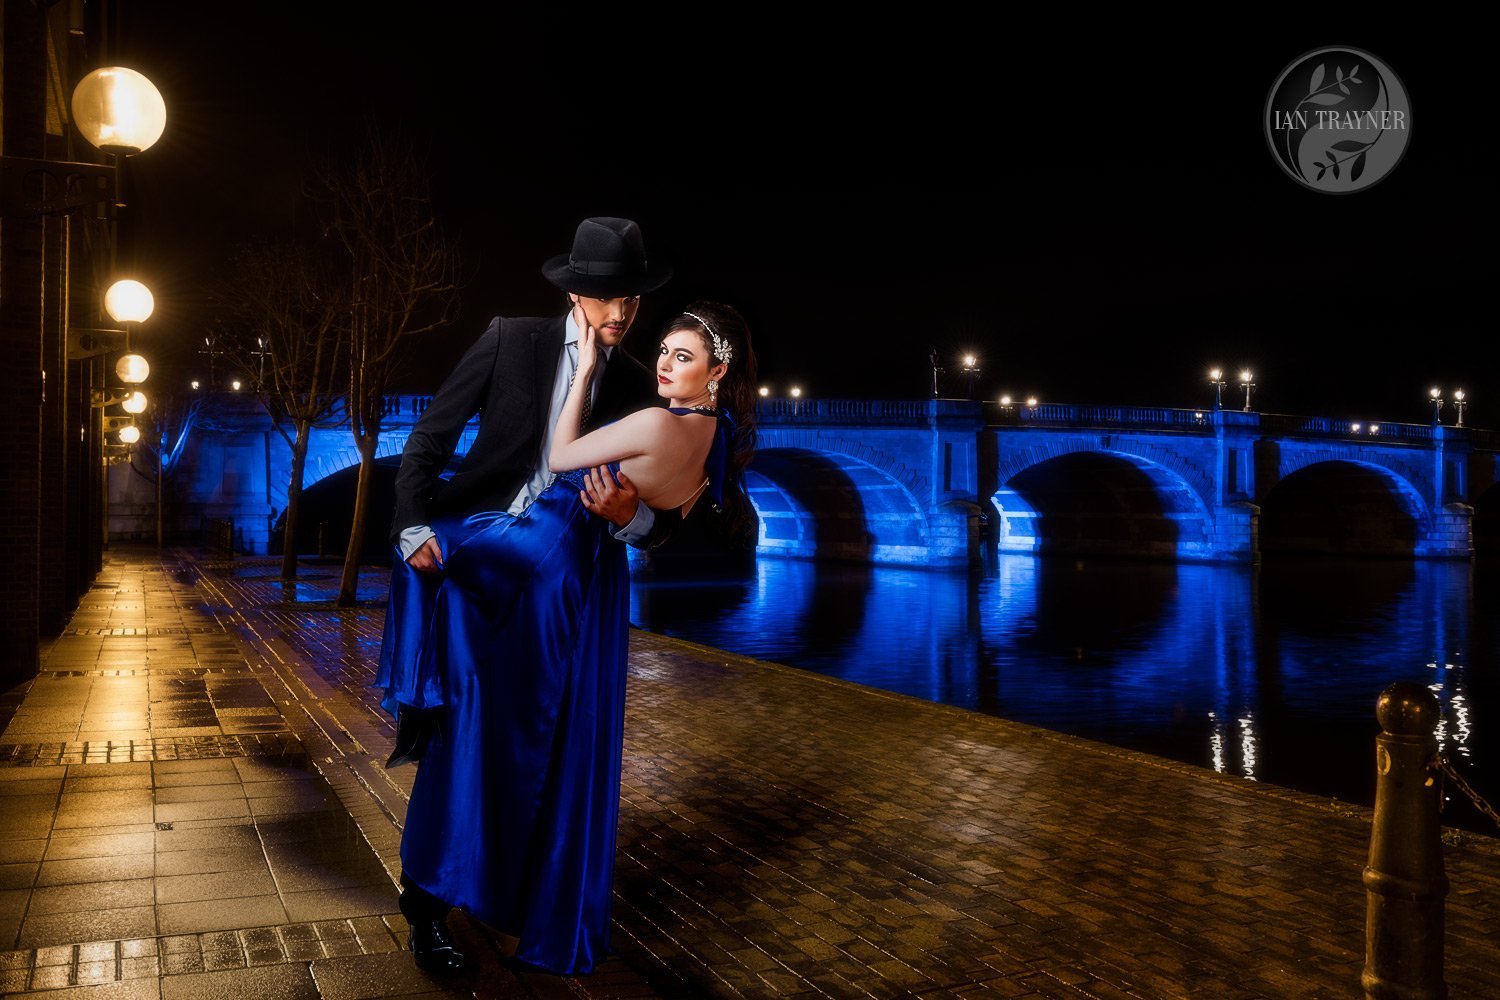 I love doing romantic and engagement photography. This is Rosemary Lloyd by Kingston bridge at night time. Photo composite.